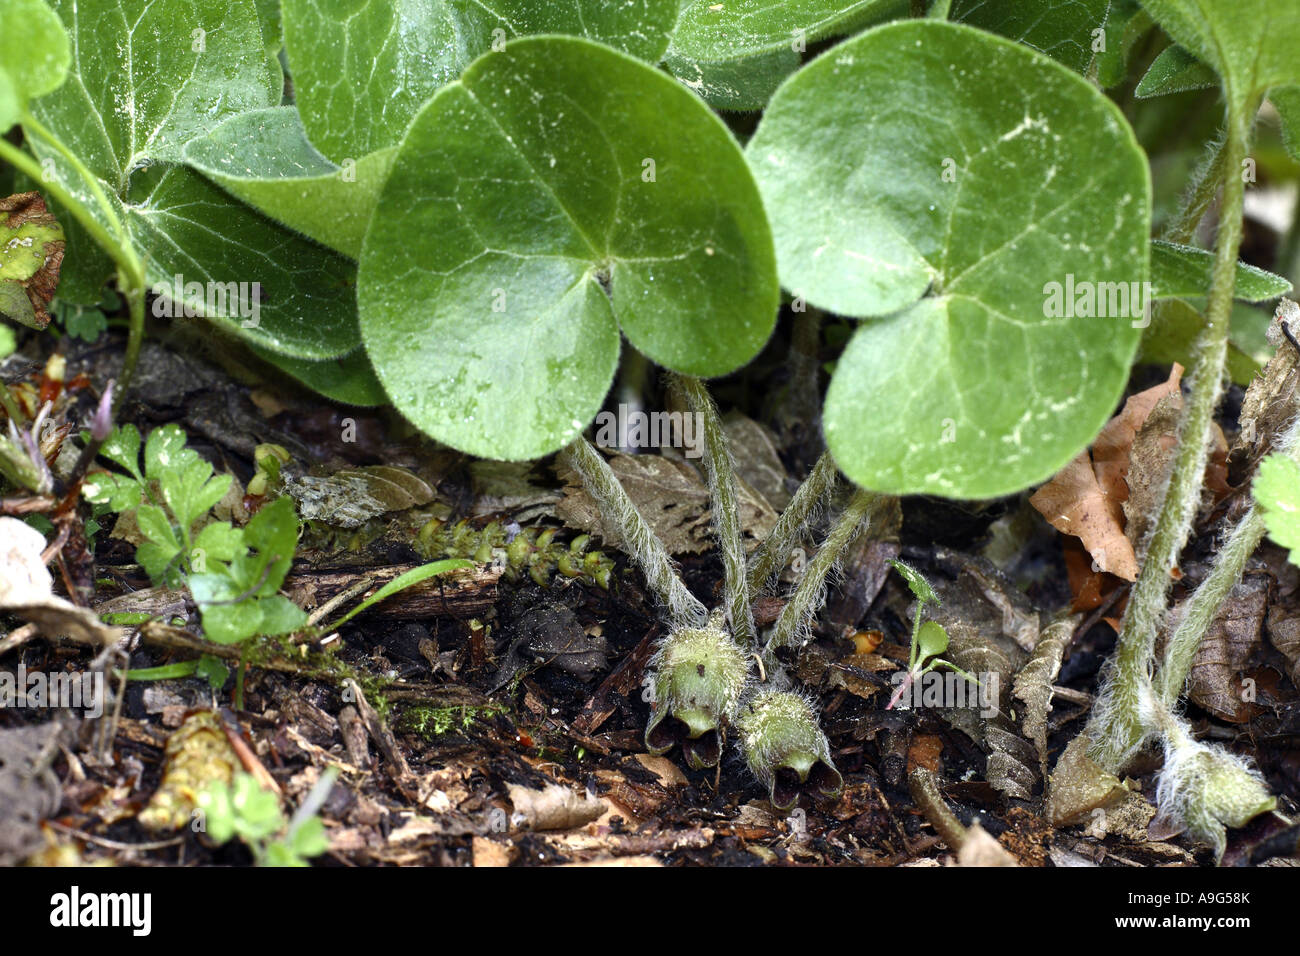 asarabacca (Asarum europaeum), blossoms and leaves, Germany, Baden-Wuerttemberg Stock Photo